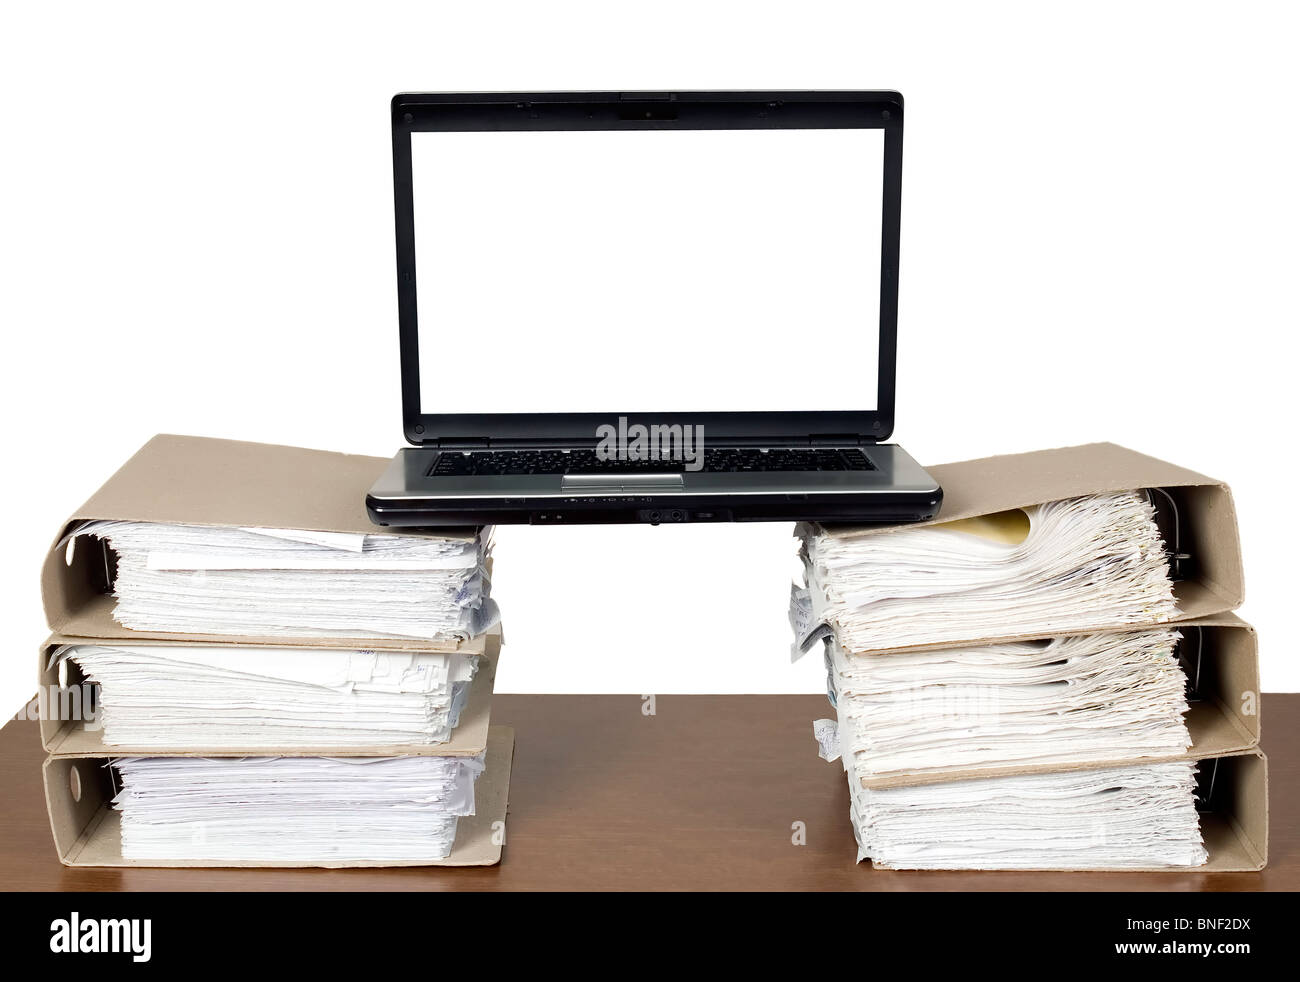 There is laptop near a lot of documents and catalogs Stock Photo